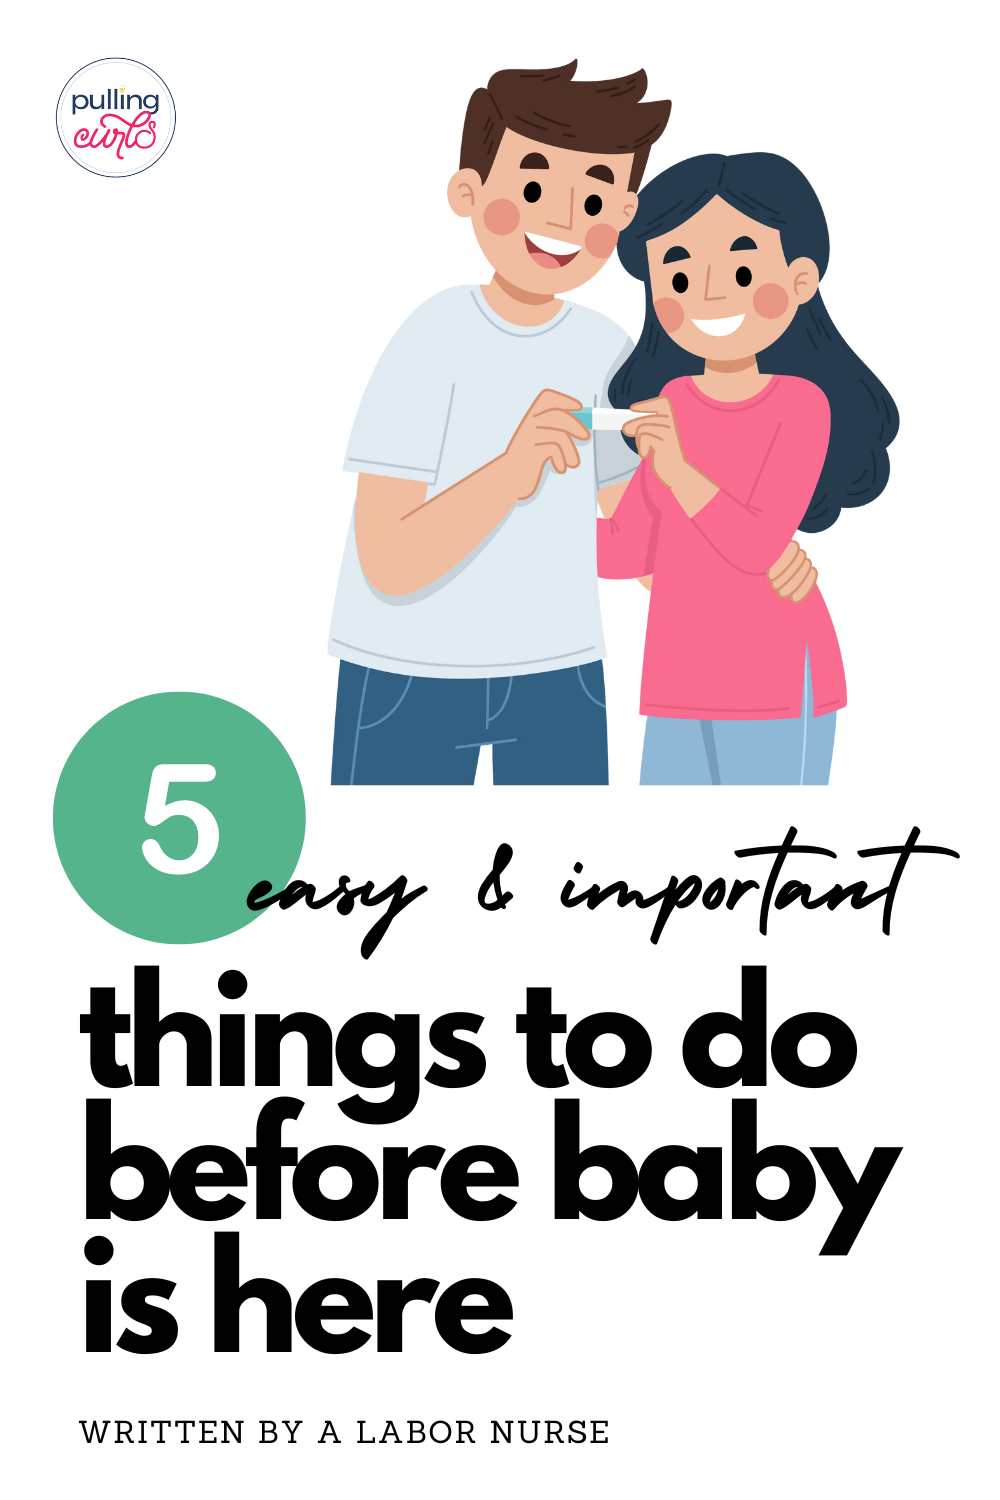 Get ready for your new baby with these 5 easy yet important tasks to complete before birth. Everything from insurance, birth plans, prenatal classes to car seats, we have you covered! via @pullingcurls